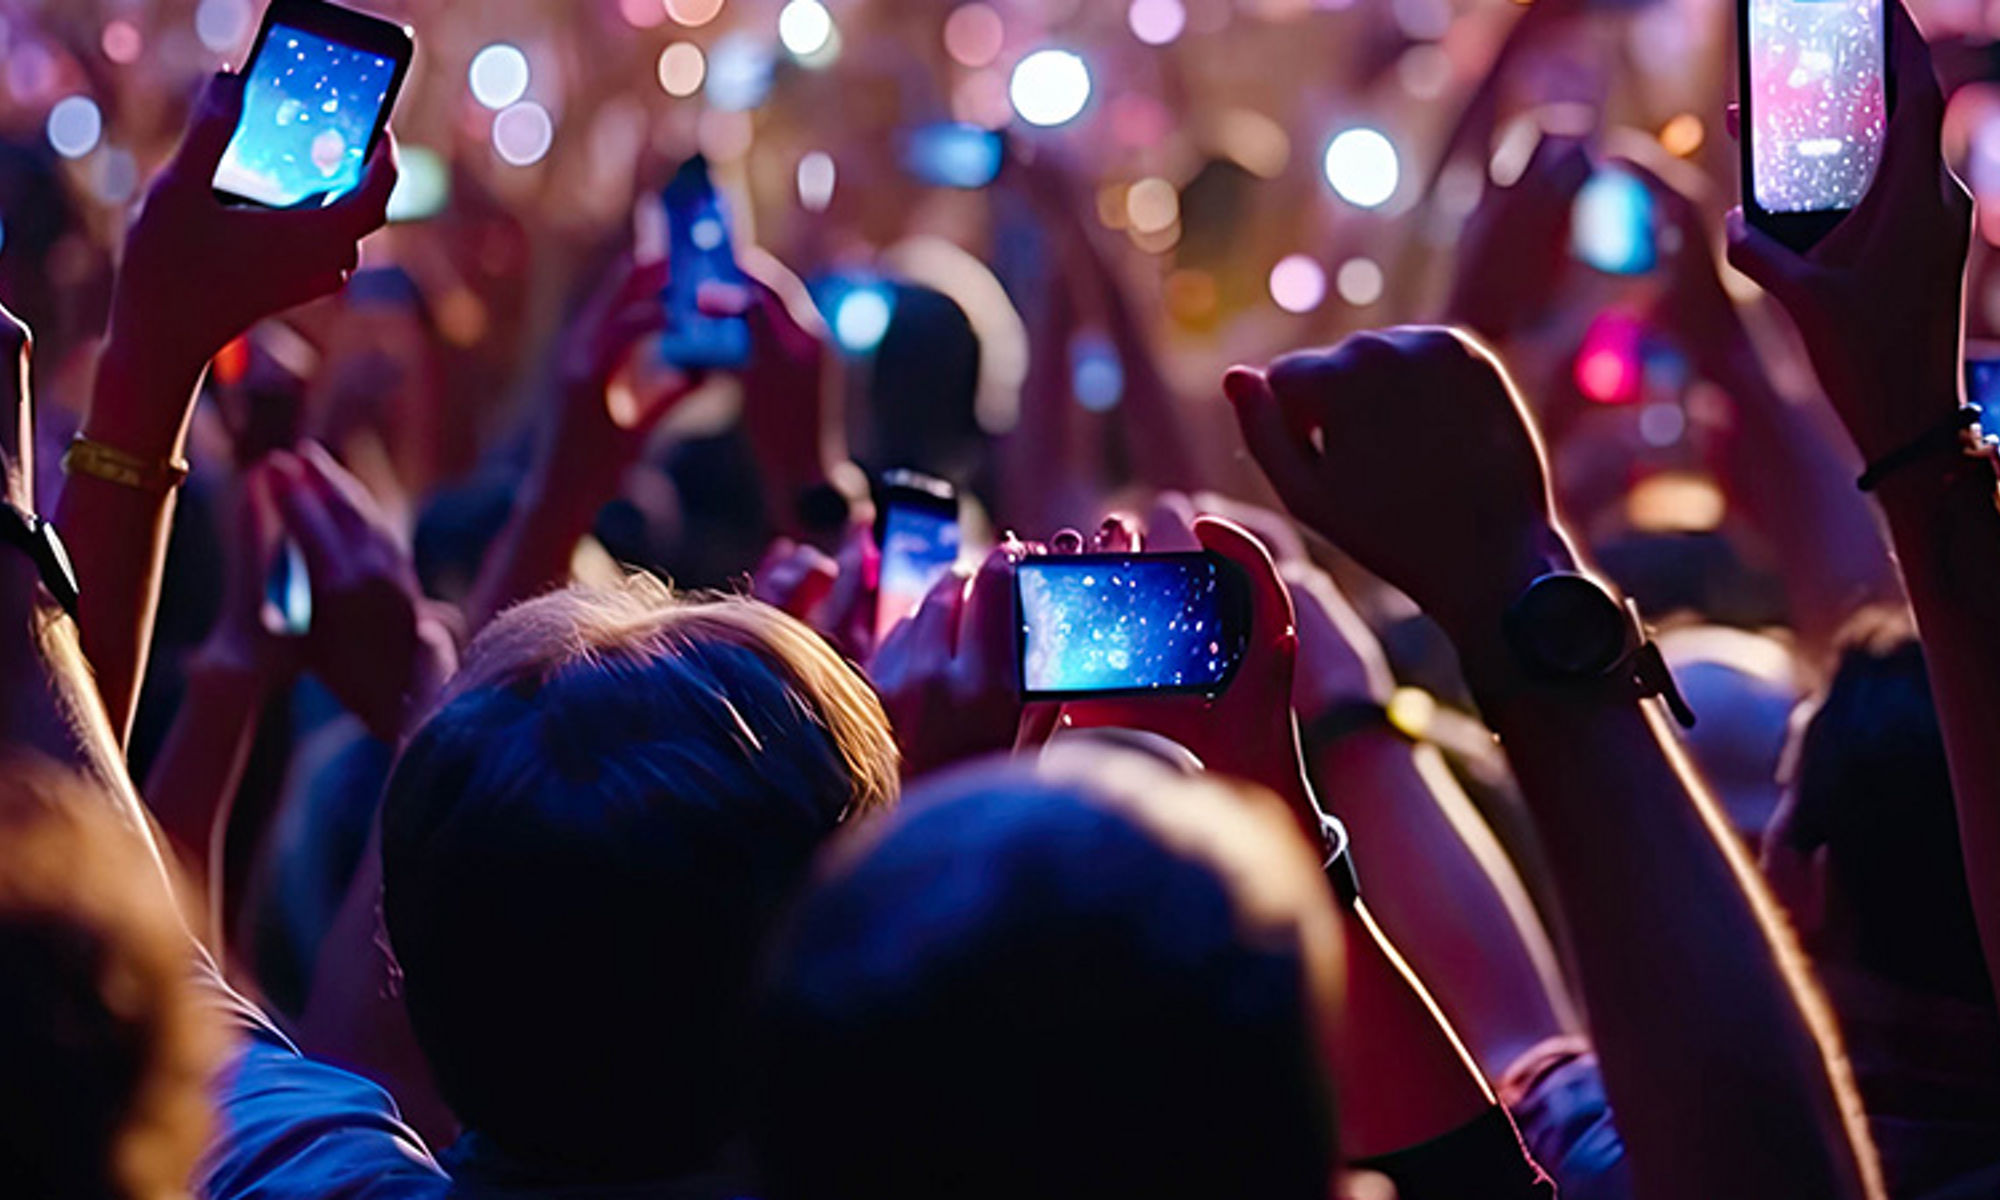 Concert crowd holding their phone up to record video